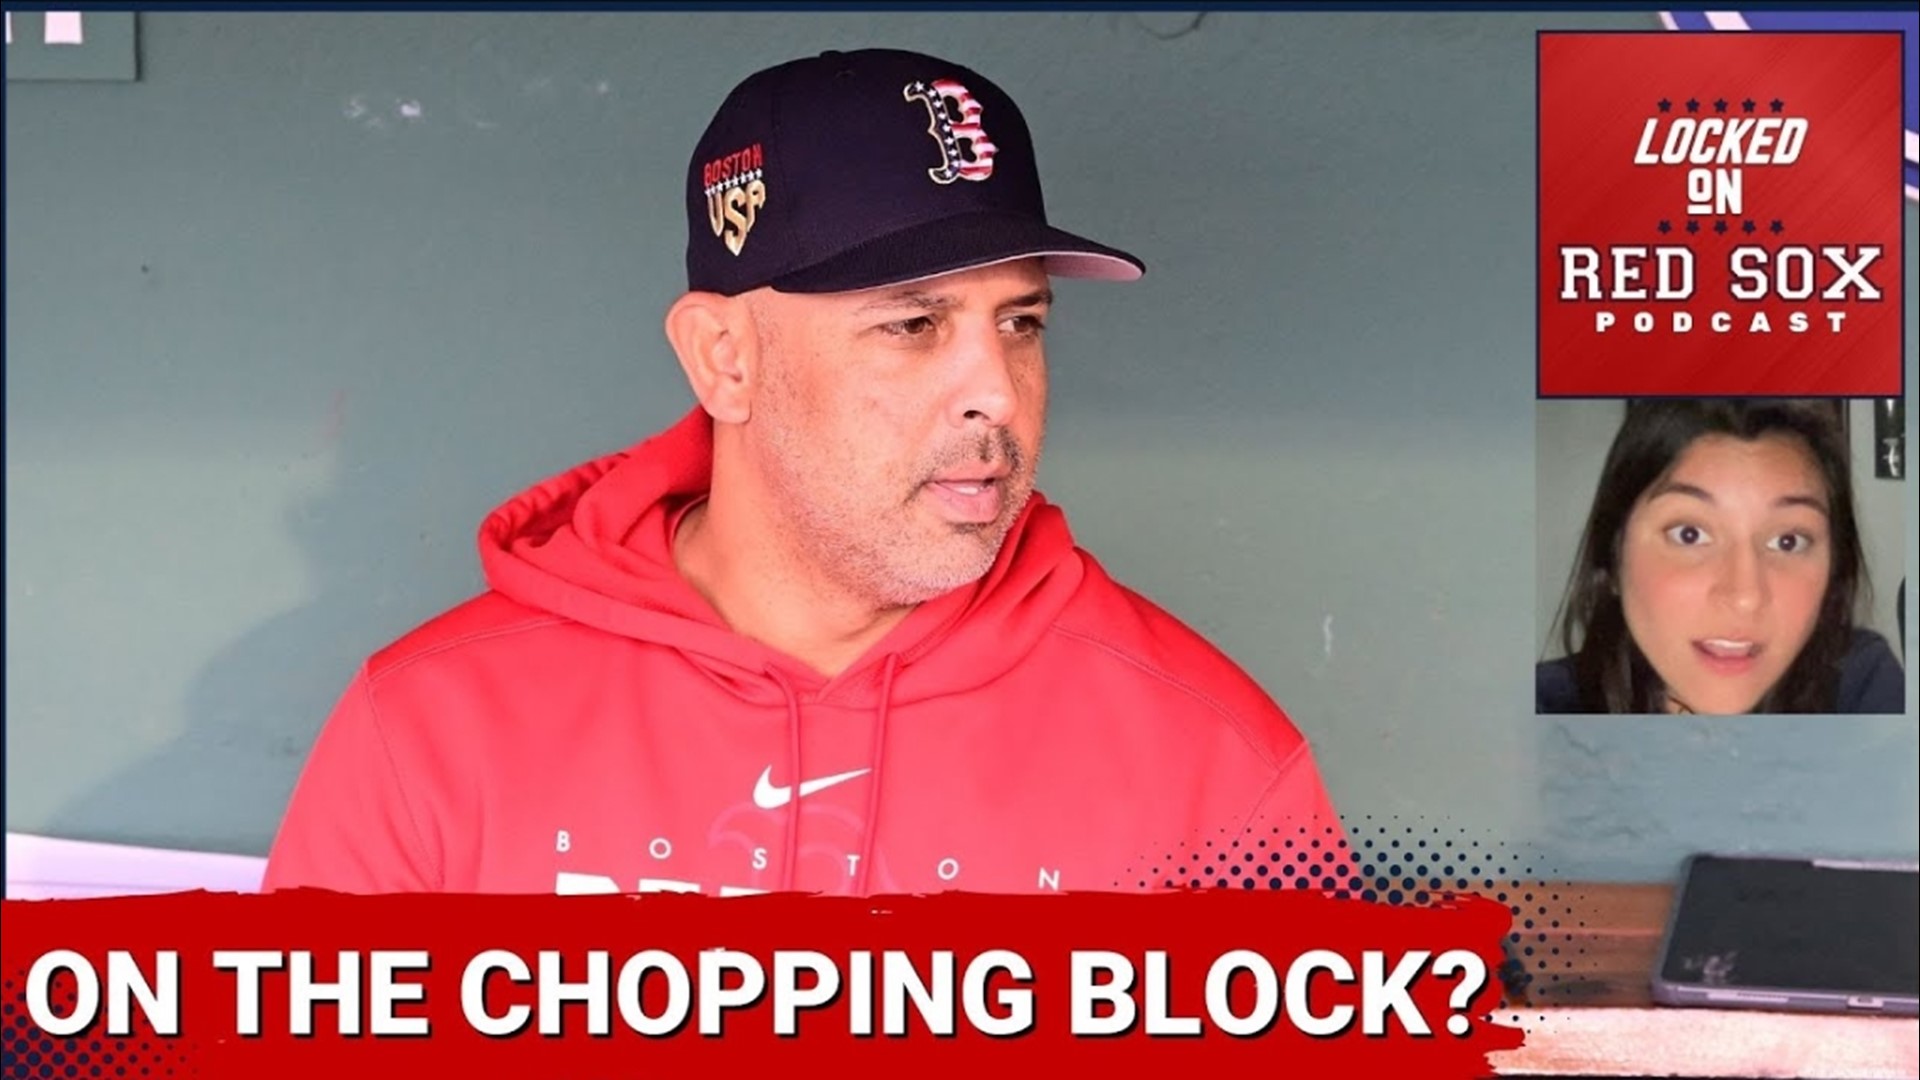 After the season the Boston Red Sox have had, is it fair to say Alex Cora could be on the chopping block this upcoming offseason?